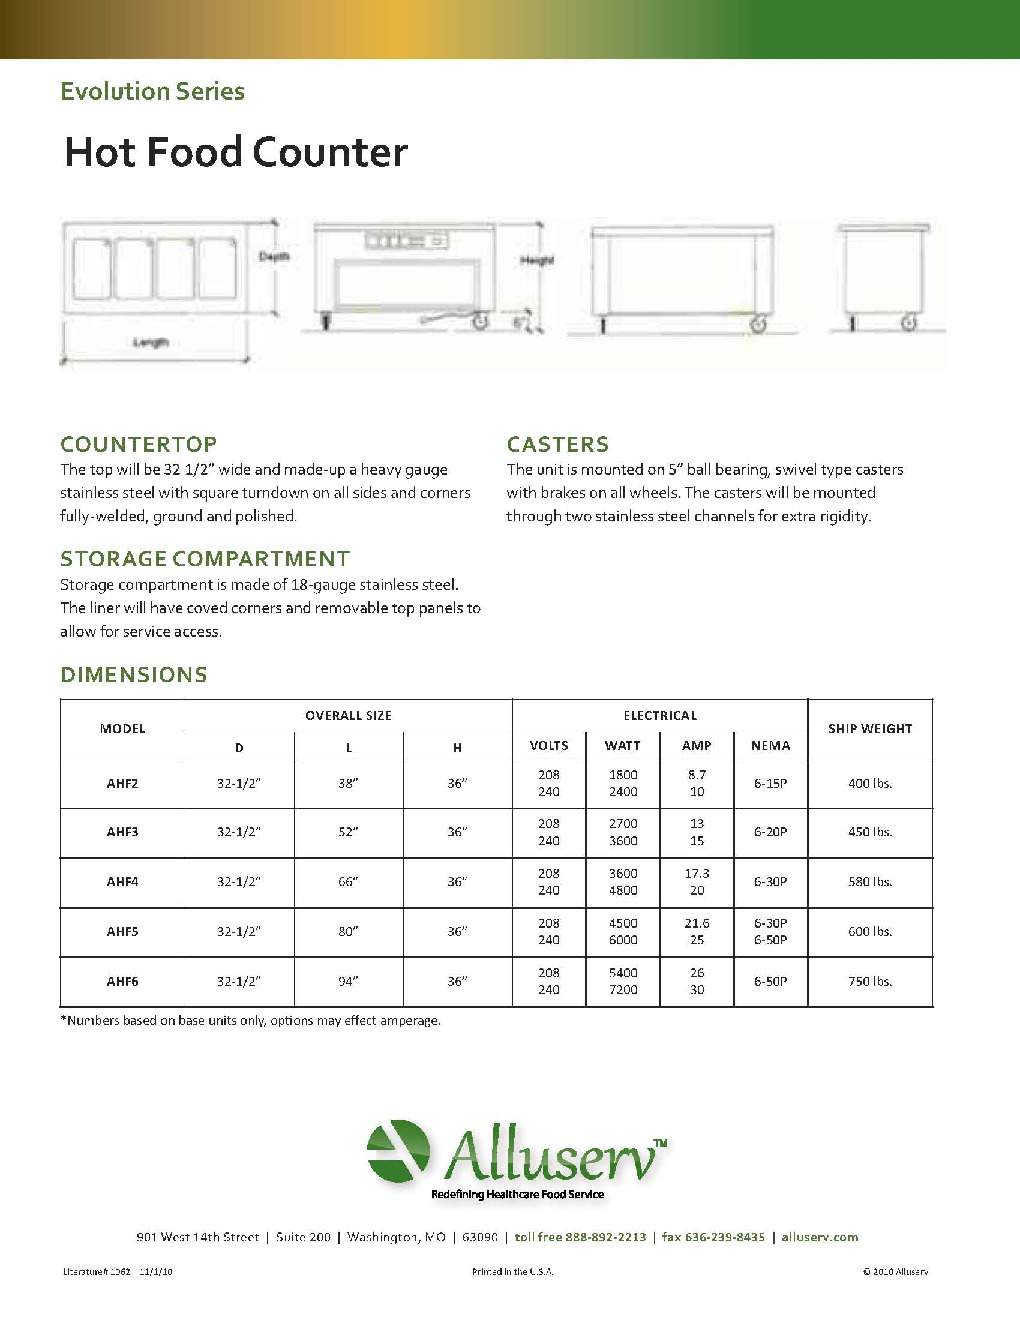 Alluserv AHF4 Electric Hot Food Serving Counter